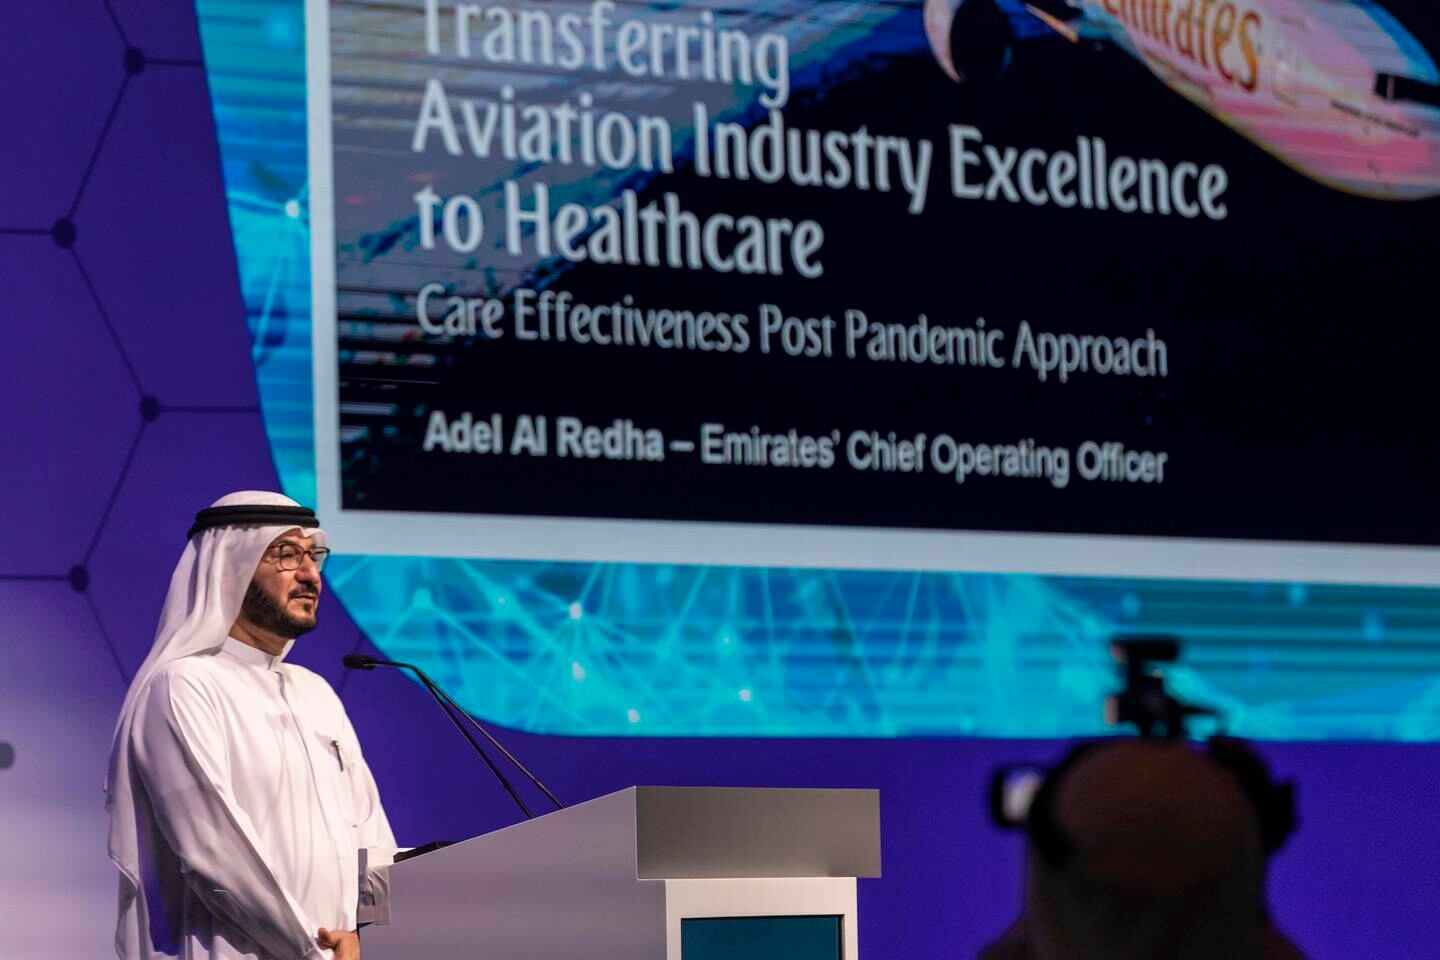 Adel Al Redha, Emirates' chief operating officer, speaks on the opening day of Dubai Health Forum. Antonie Robertson / The National